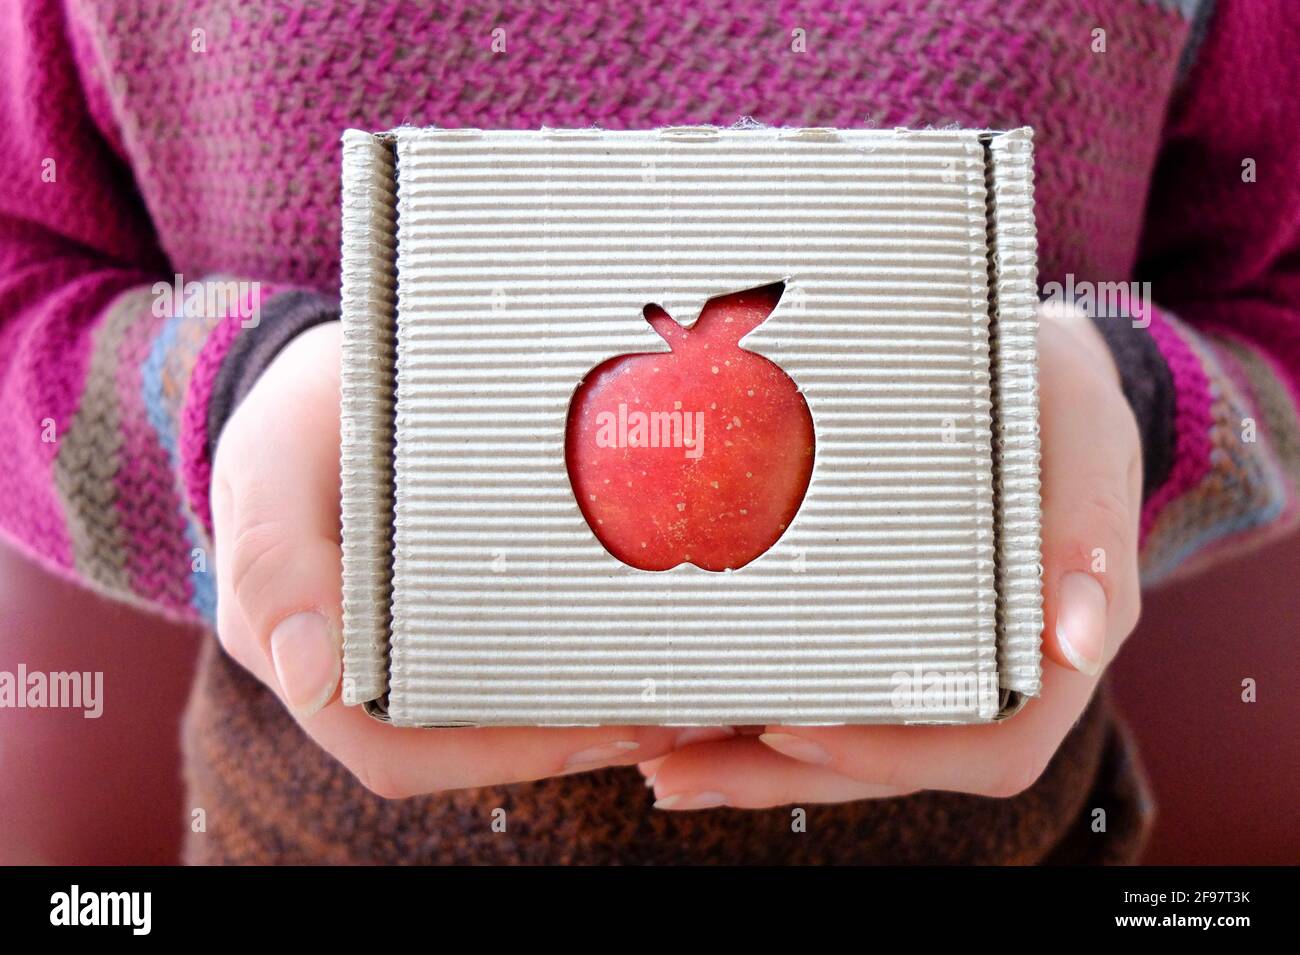 Red apple as a gift (Malus domestica) Stock Photo